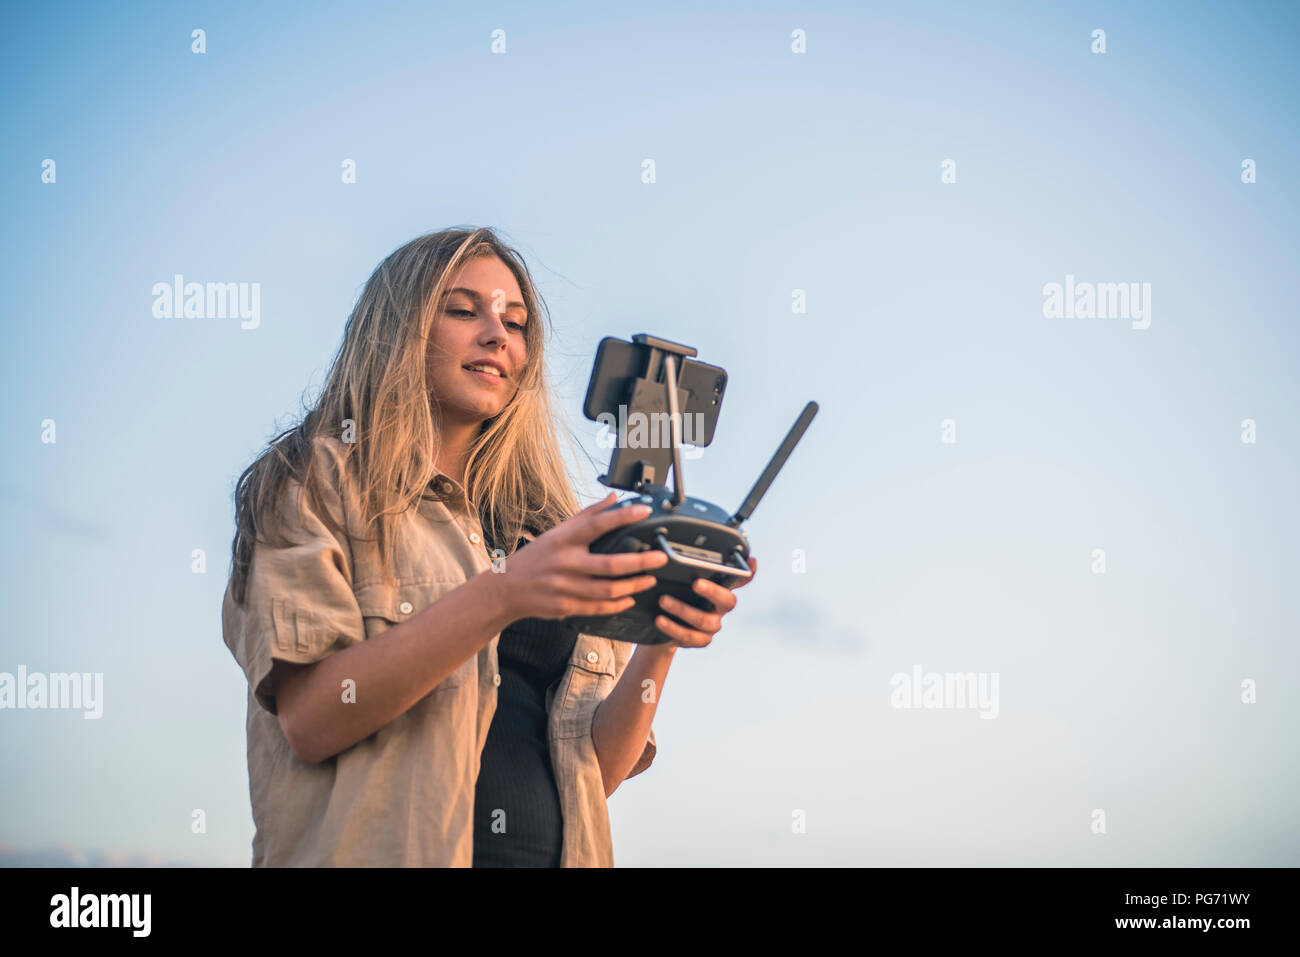 Young woman in the country side using drone Stock Photo